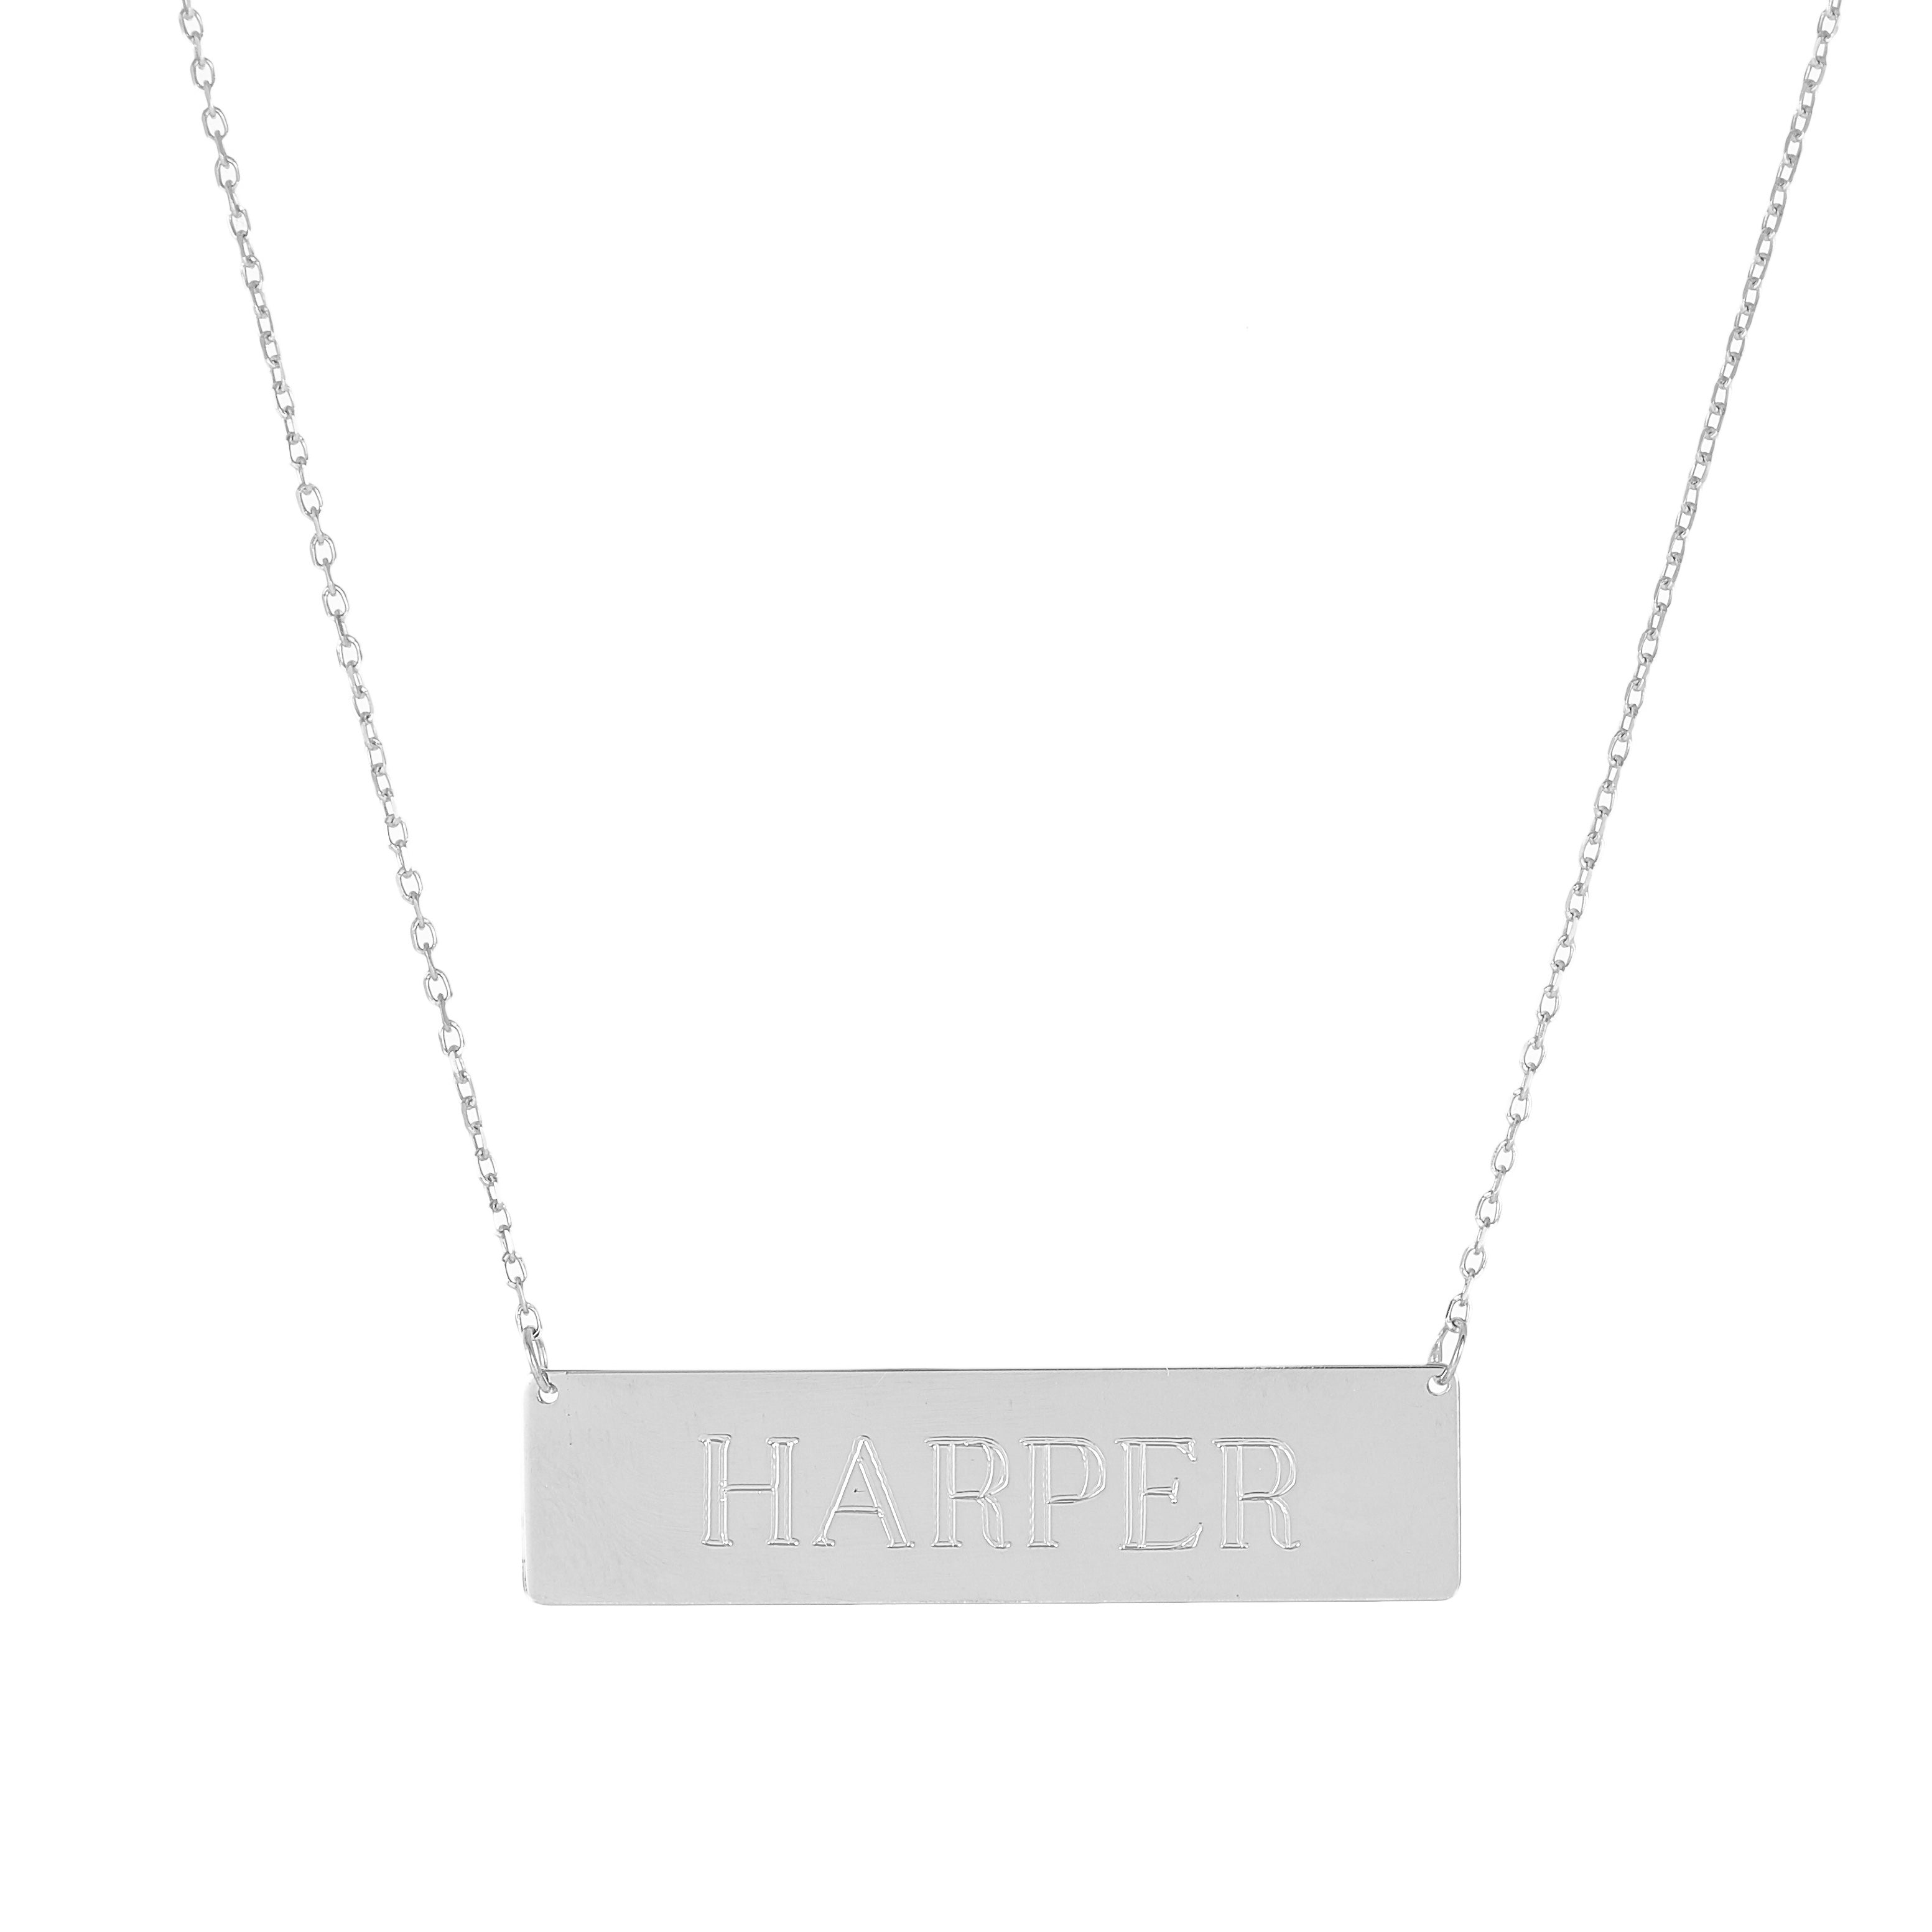 Alter Ego- 14K Gold Nameplate Necklace- Lola James Jewelry 